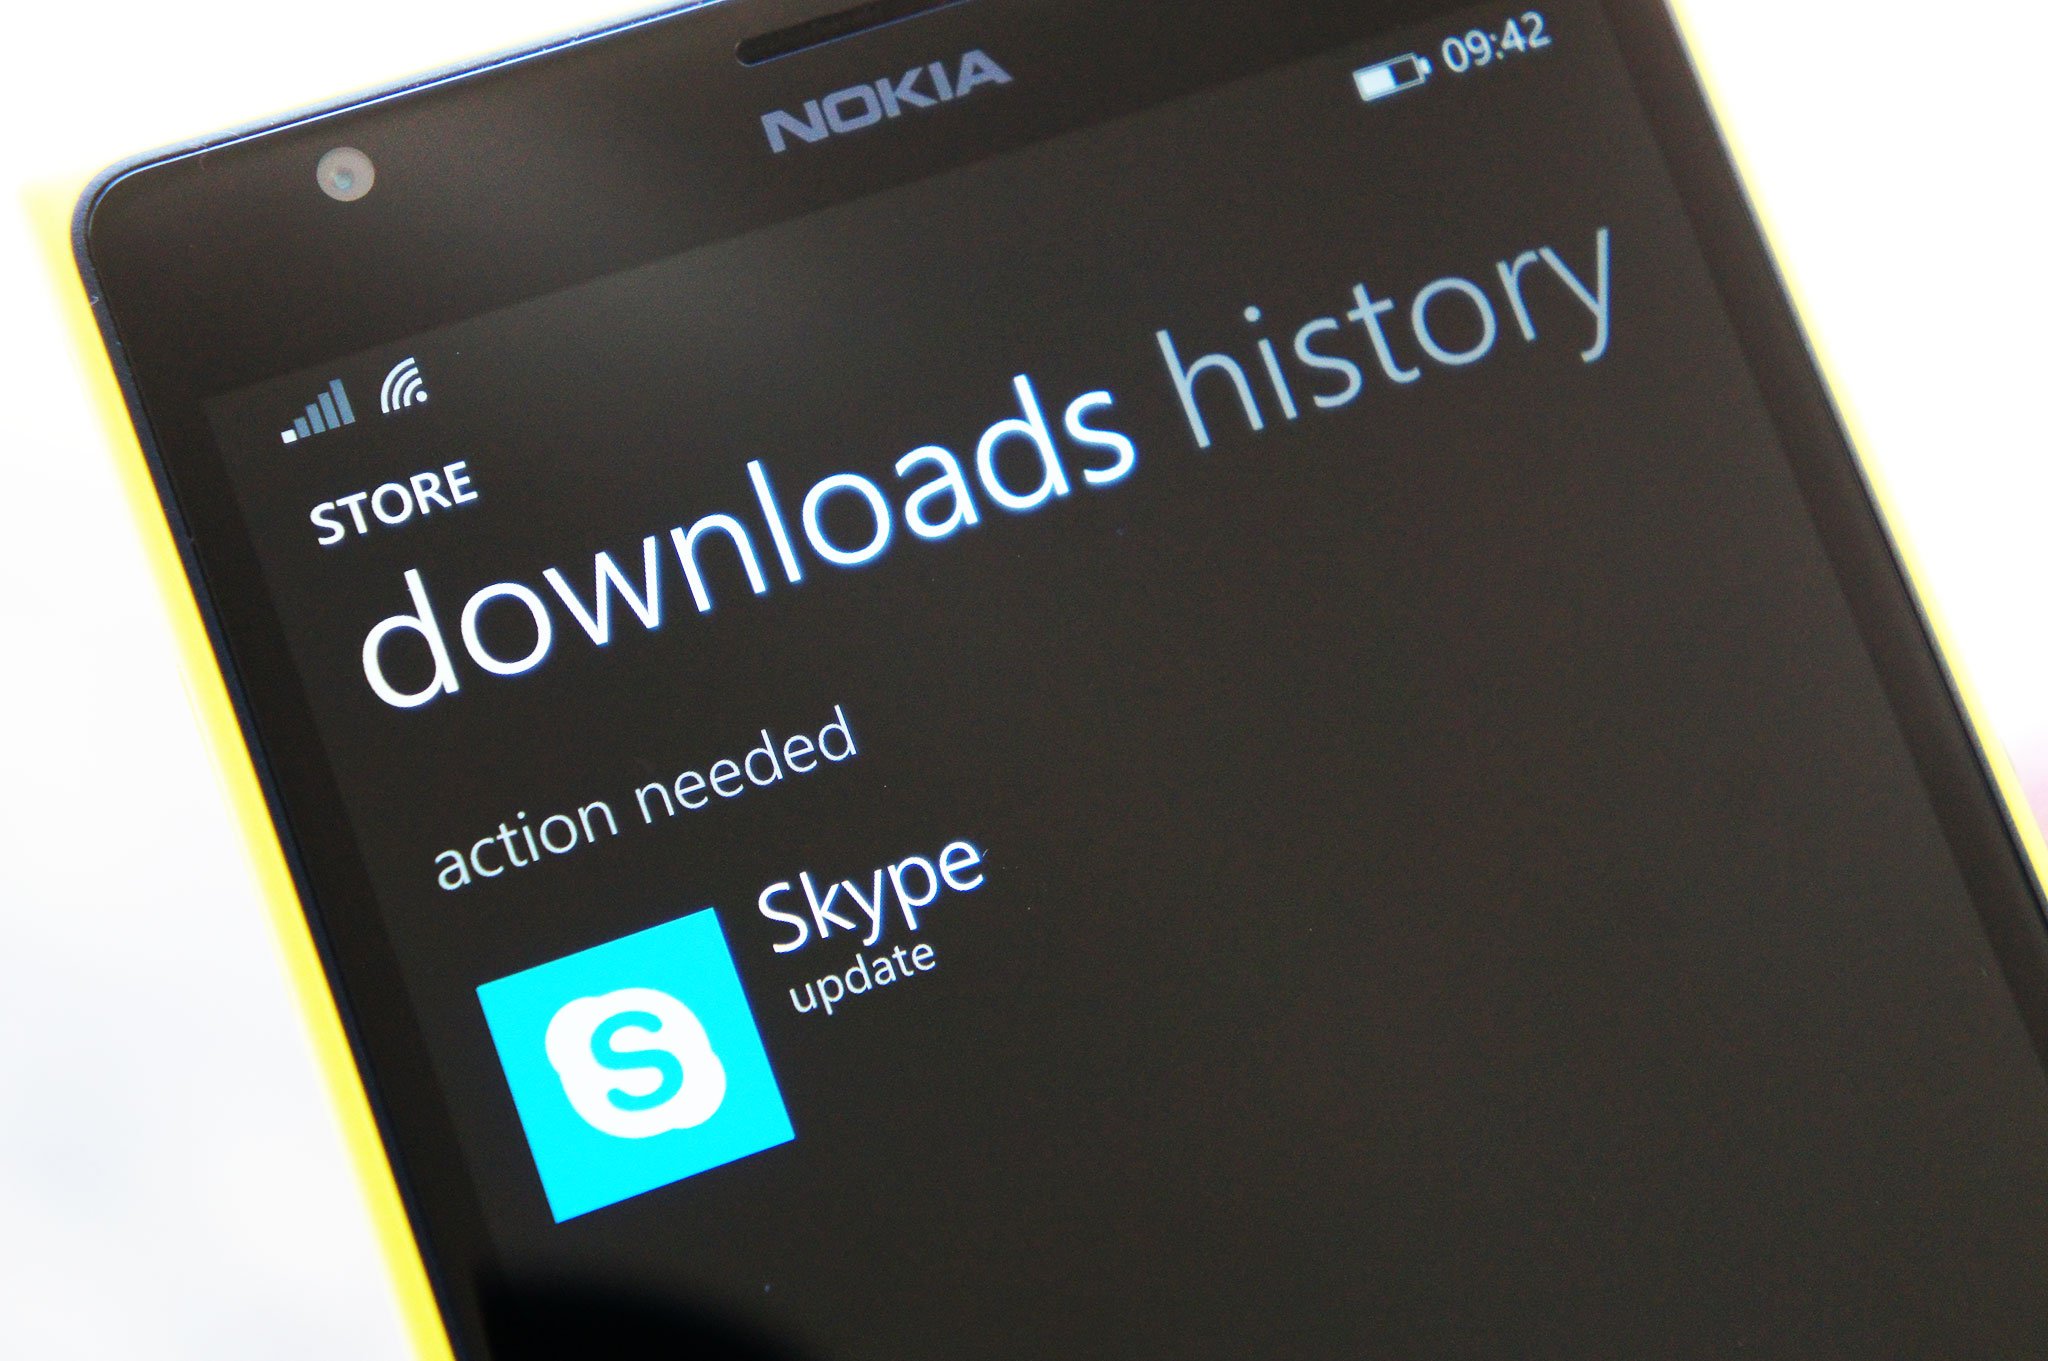 Skype for Windows Phone 8.1 adds Mojis in latest update